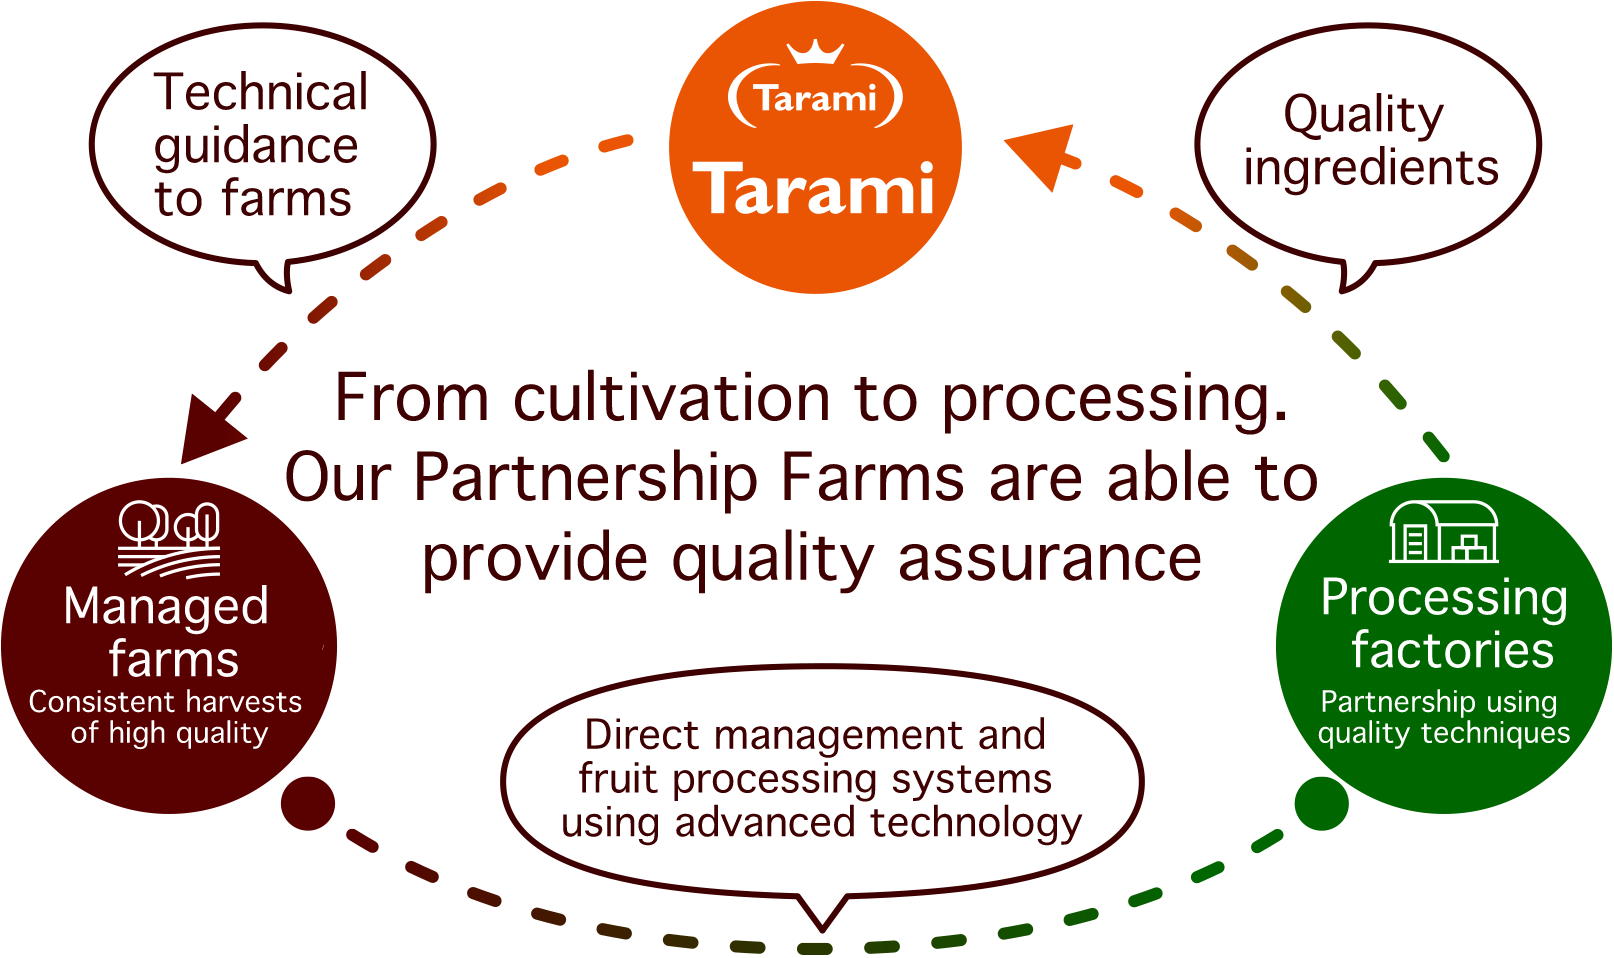 About our Partnership Farms